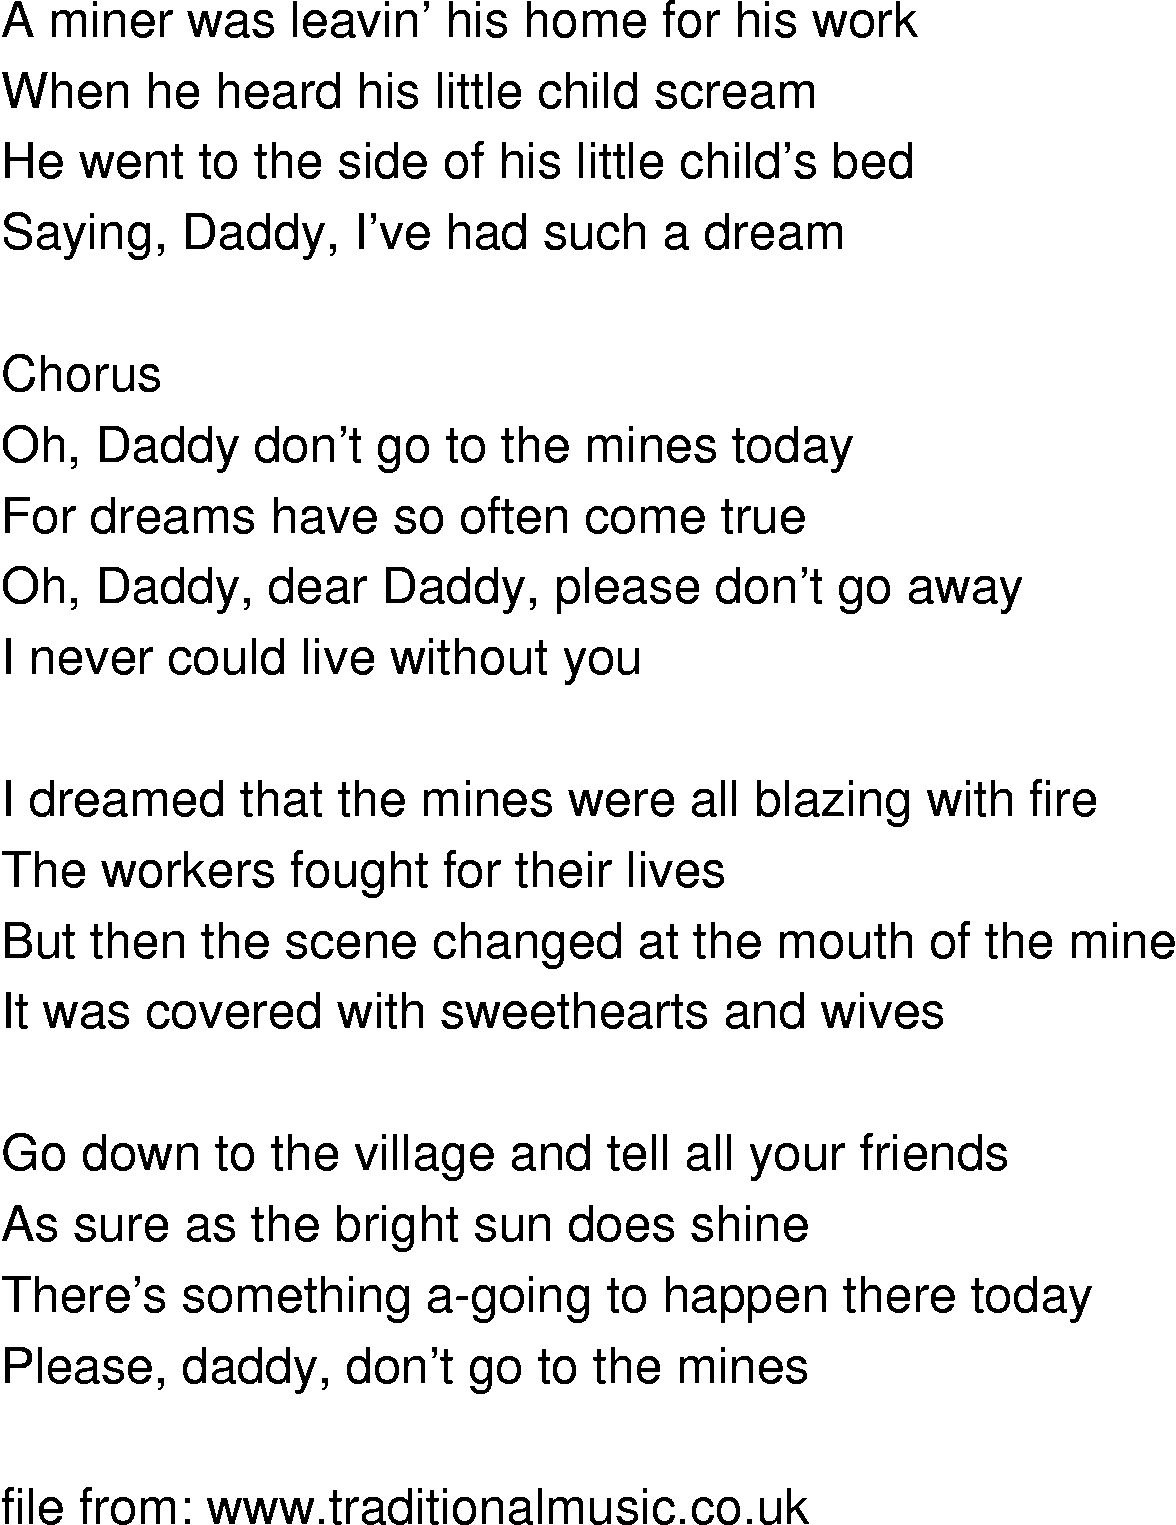 Old-Time Song Lyrics - Dream Of A Miners Child